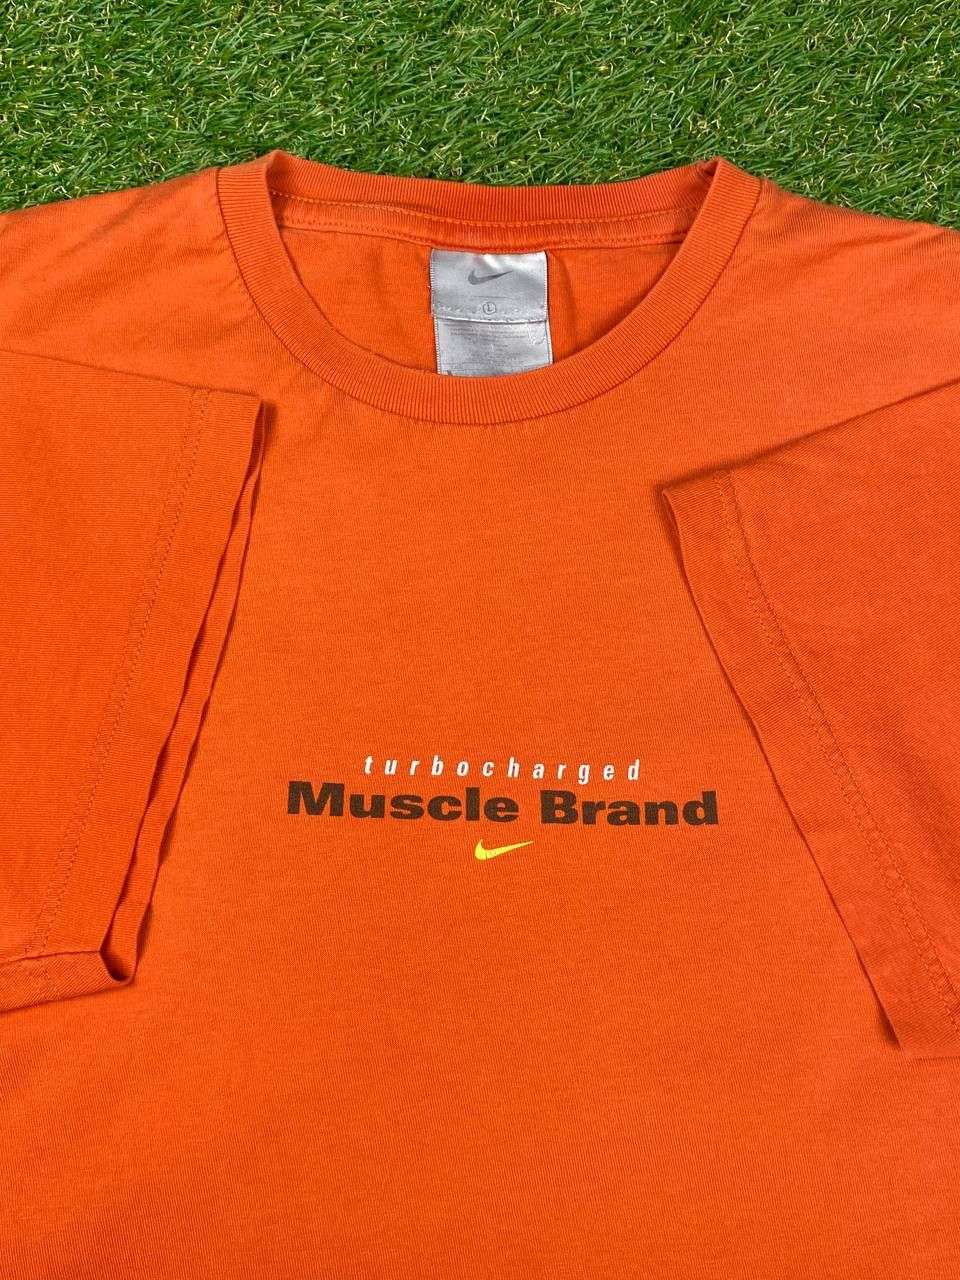 Pre-owned Nike X Vintage Nike "turbocharged Muscle Brand" 90's Graphic Tee In Orange